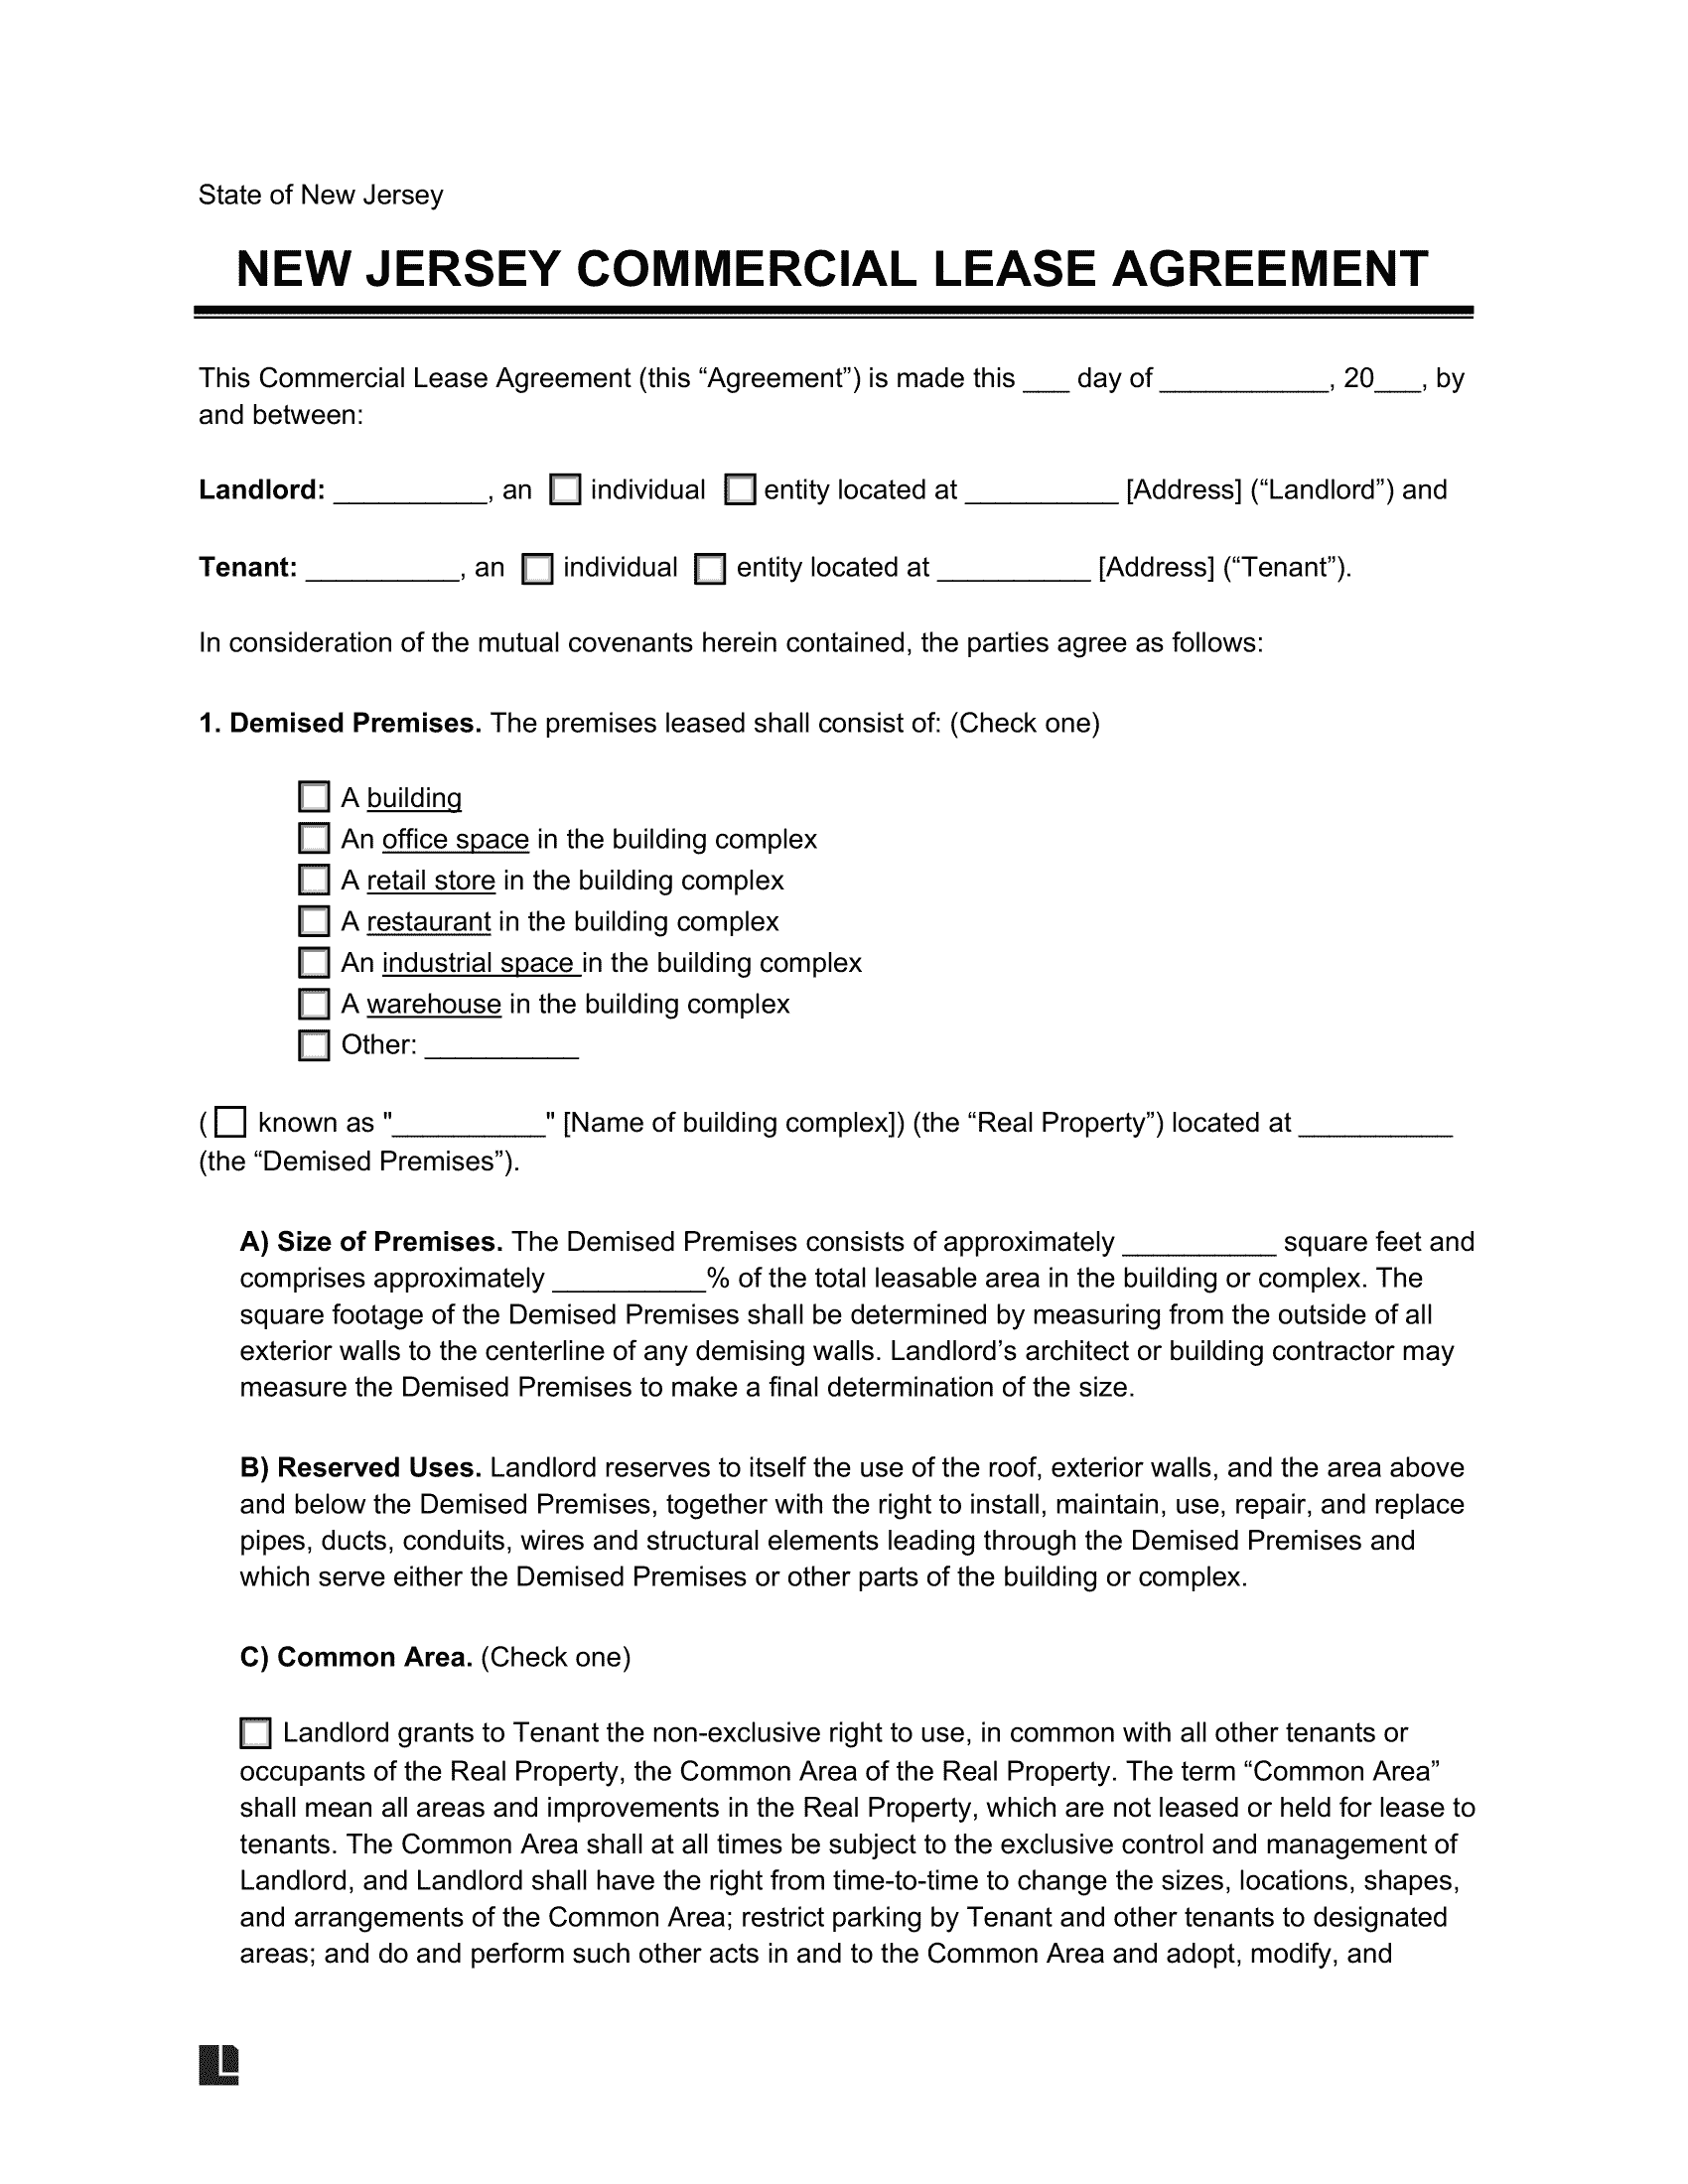 New Jersey Commercial Lease Agreement